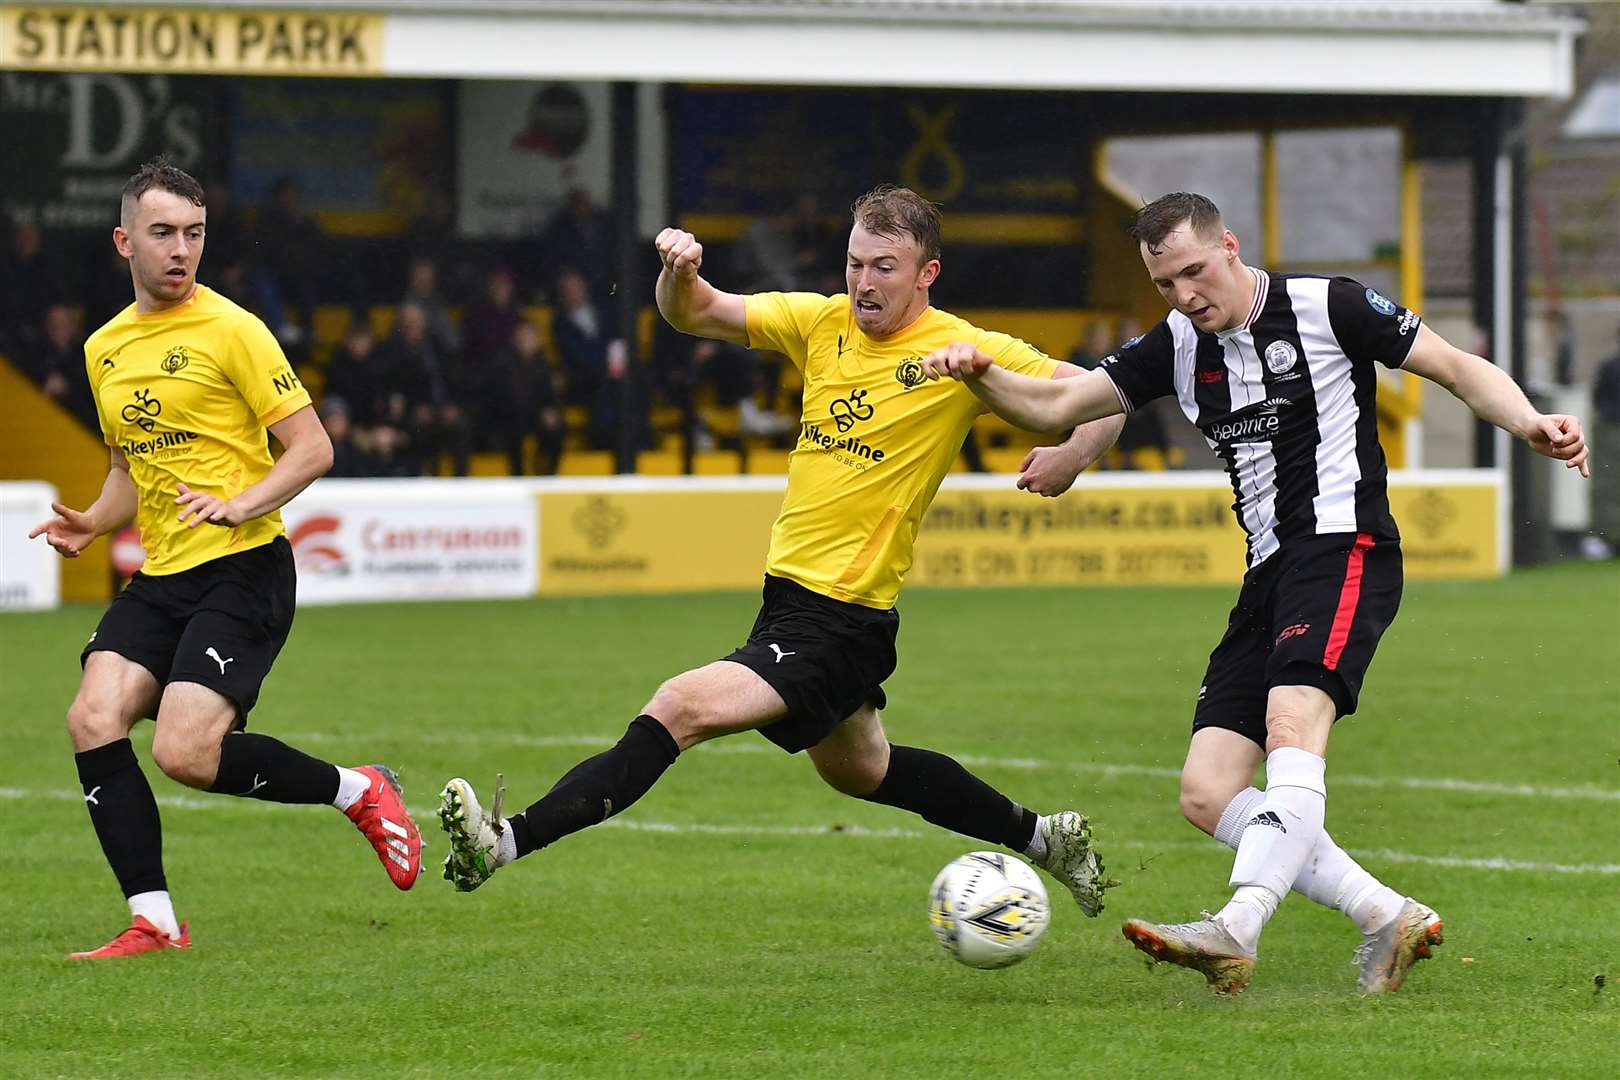 Steven Anderson scored for Wick Academy in the 2-2 draw with Nairn County at Station Park in October.  Photo: Mel Roger